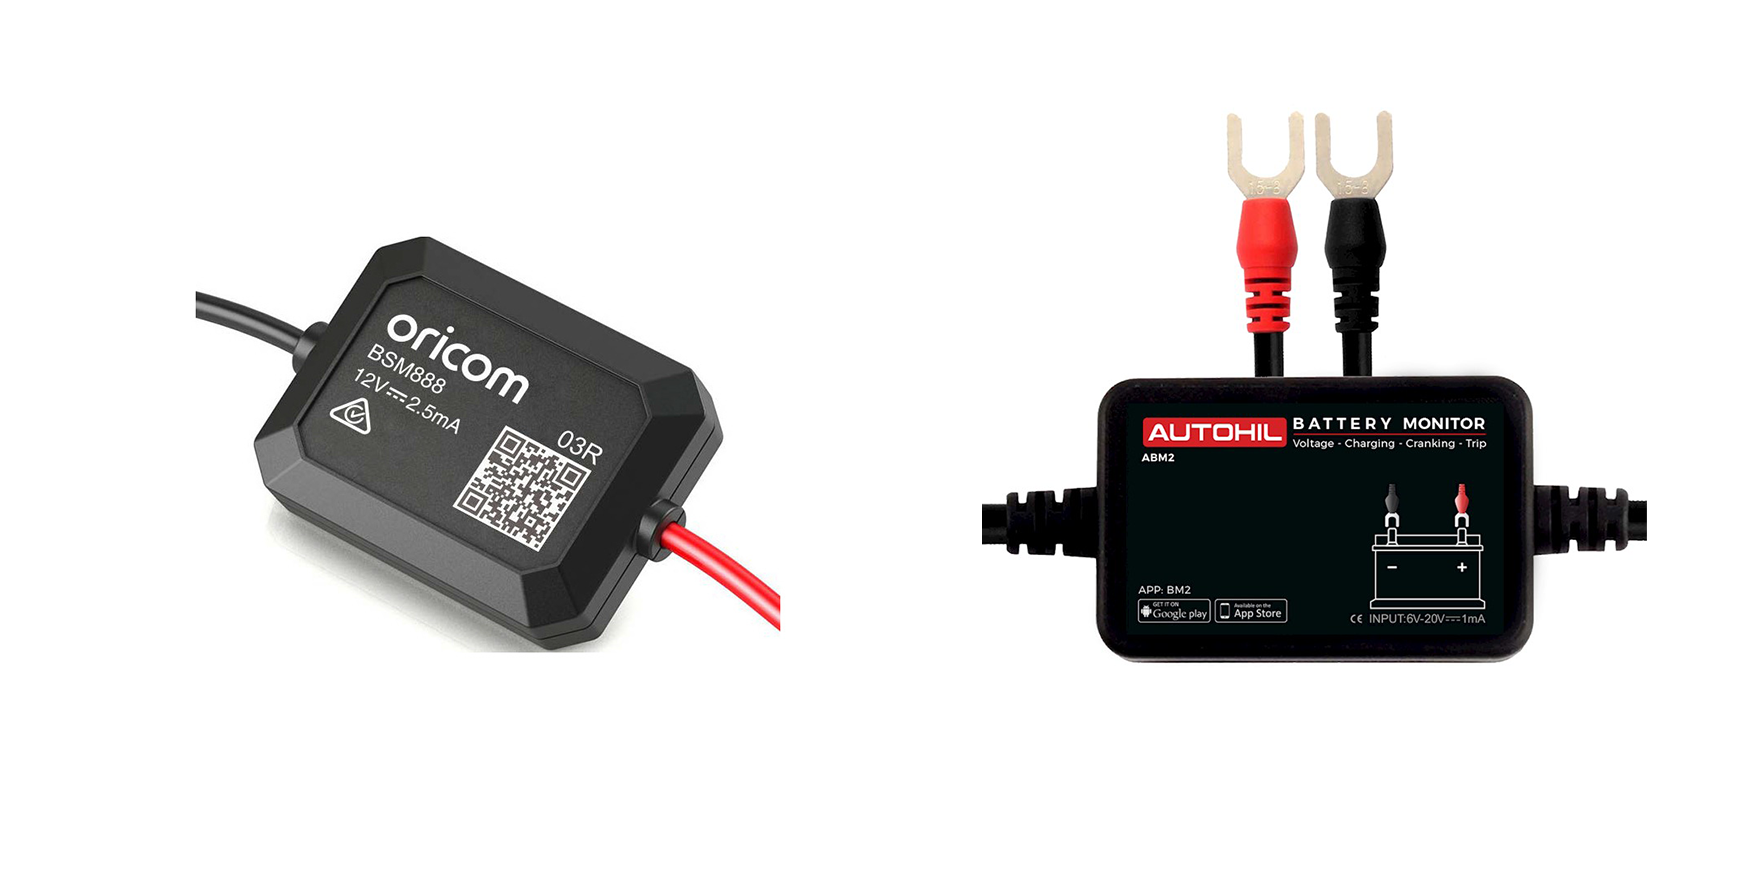 Car Battery Monitor, uses Bluetooth and Mobile App